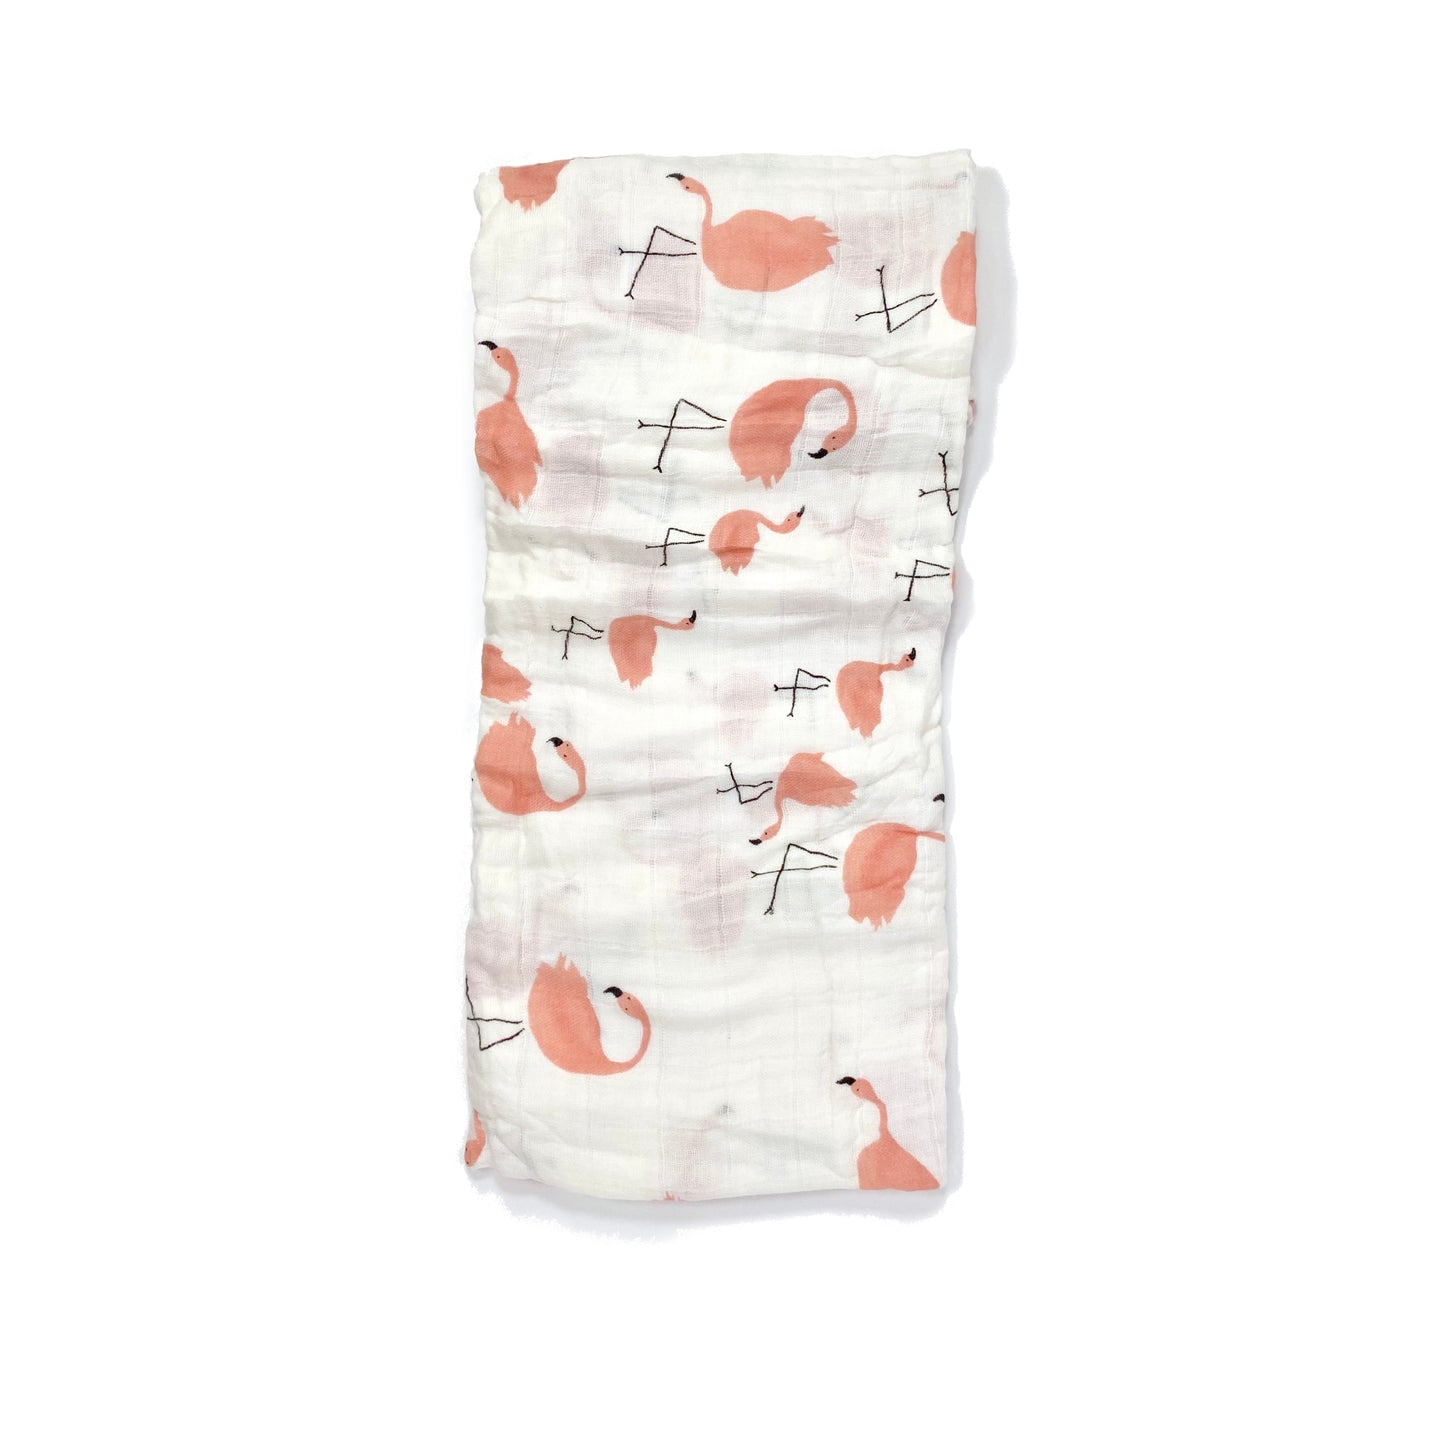 A folded muslin swaddle blanket with a flamingo design.